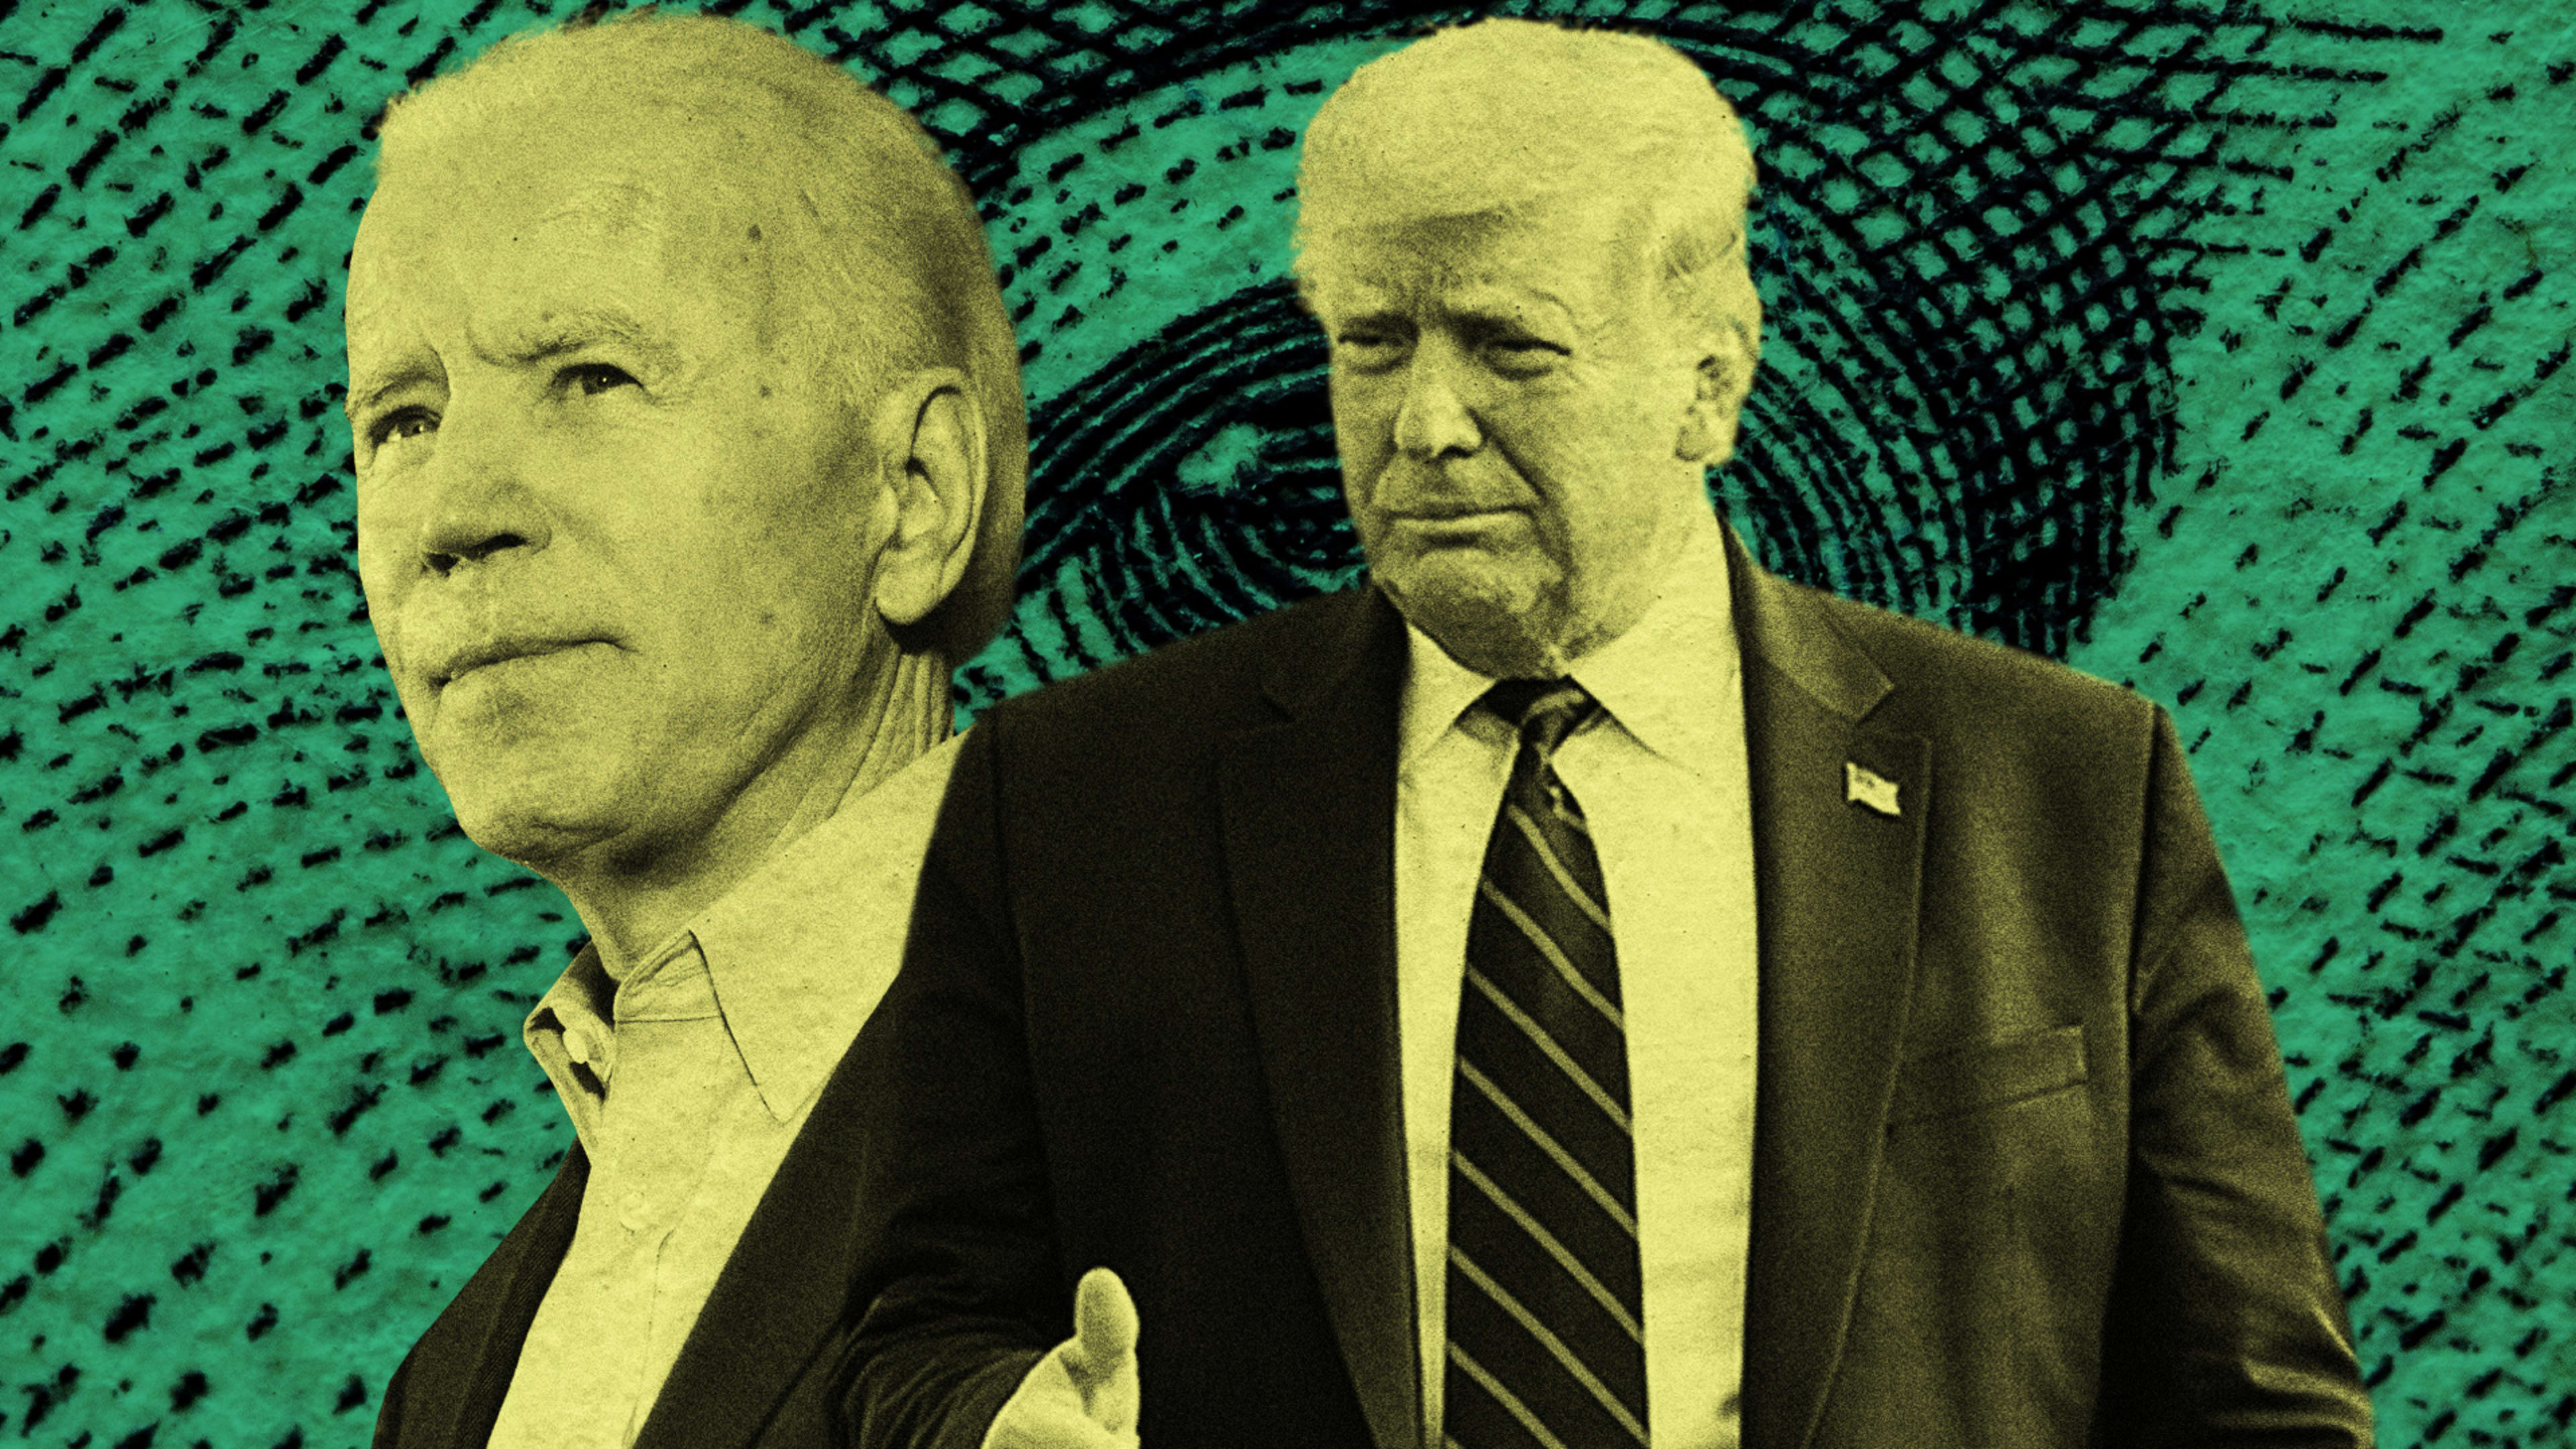 Trump vs. Biden on COVID-19 relief and economic stimulus: Here’s what they’re promising